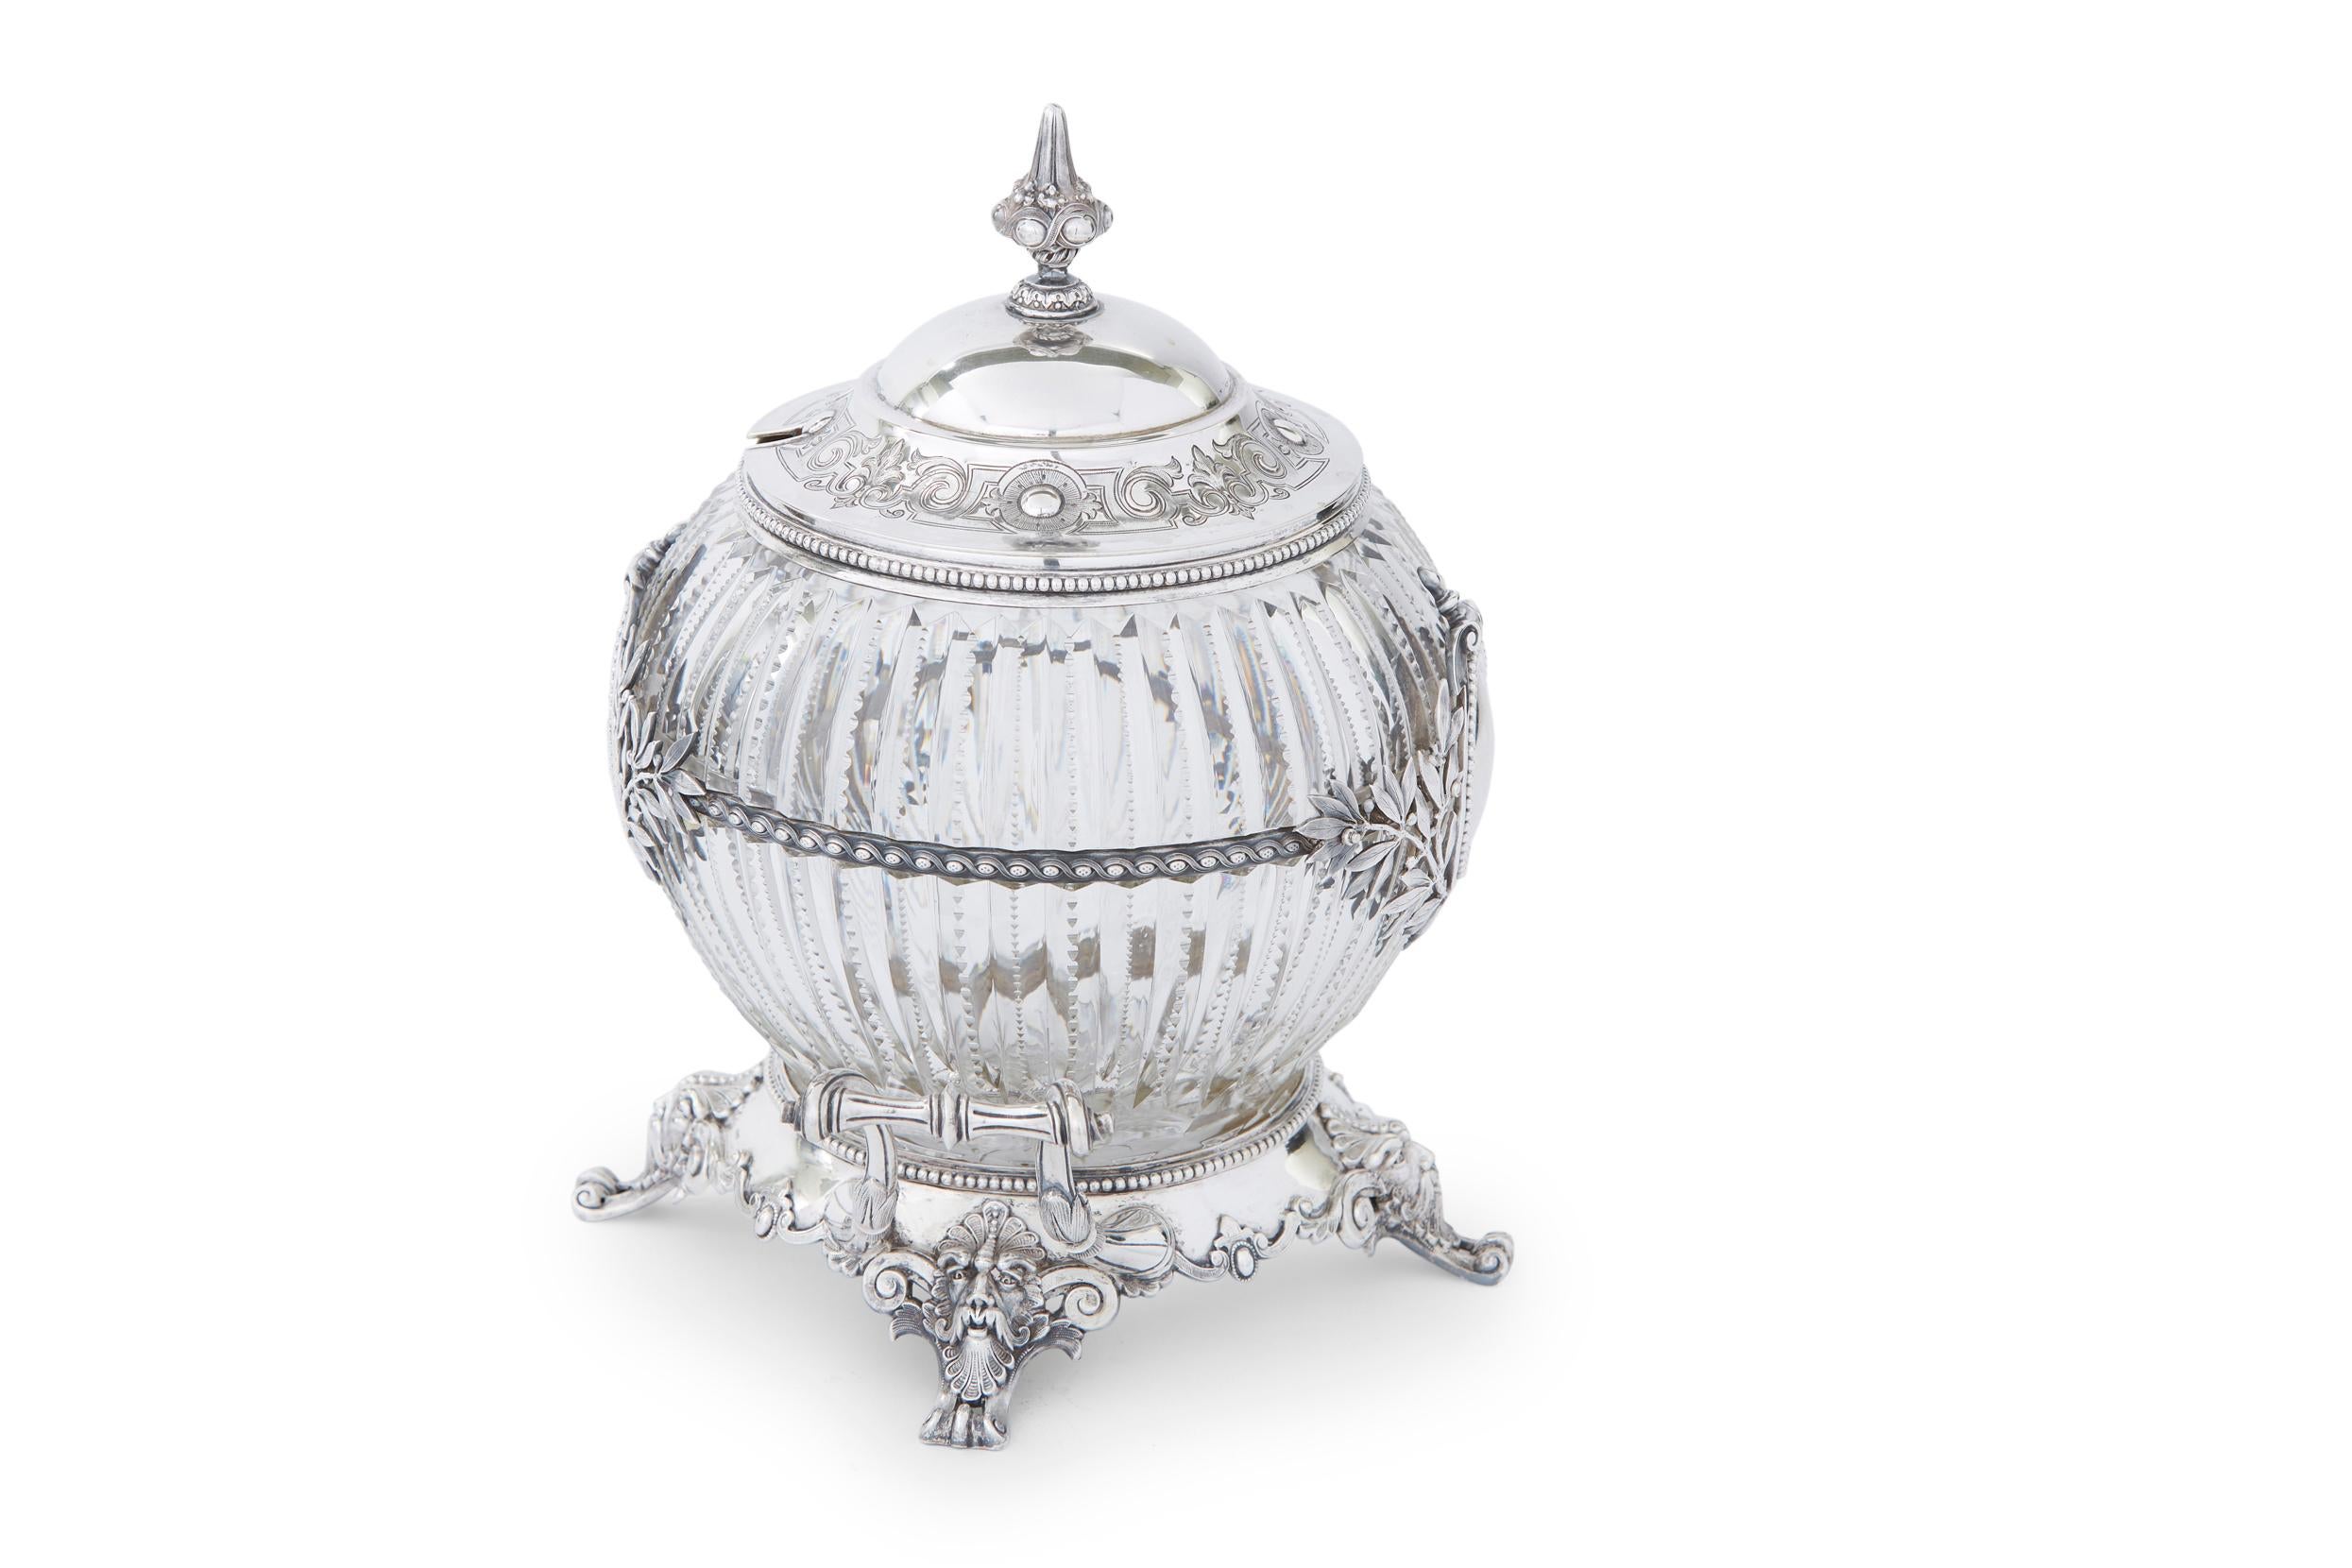 Early 19th century mounted sterling silver framed with beveled etched cut crystal barware / tableware footed server with side handles and exterior design details. The covered top featuring a gold wash interior with exterior design details. The piece